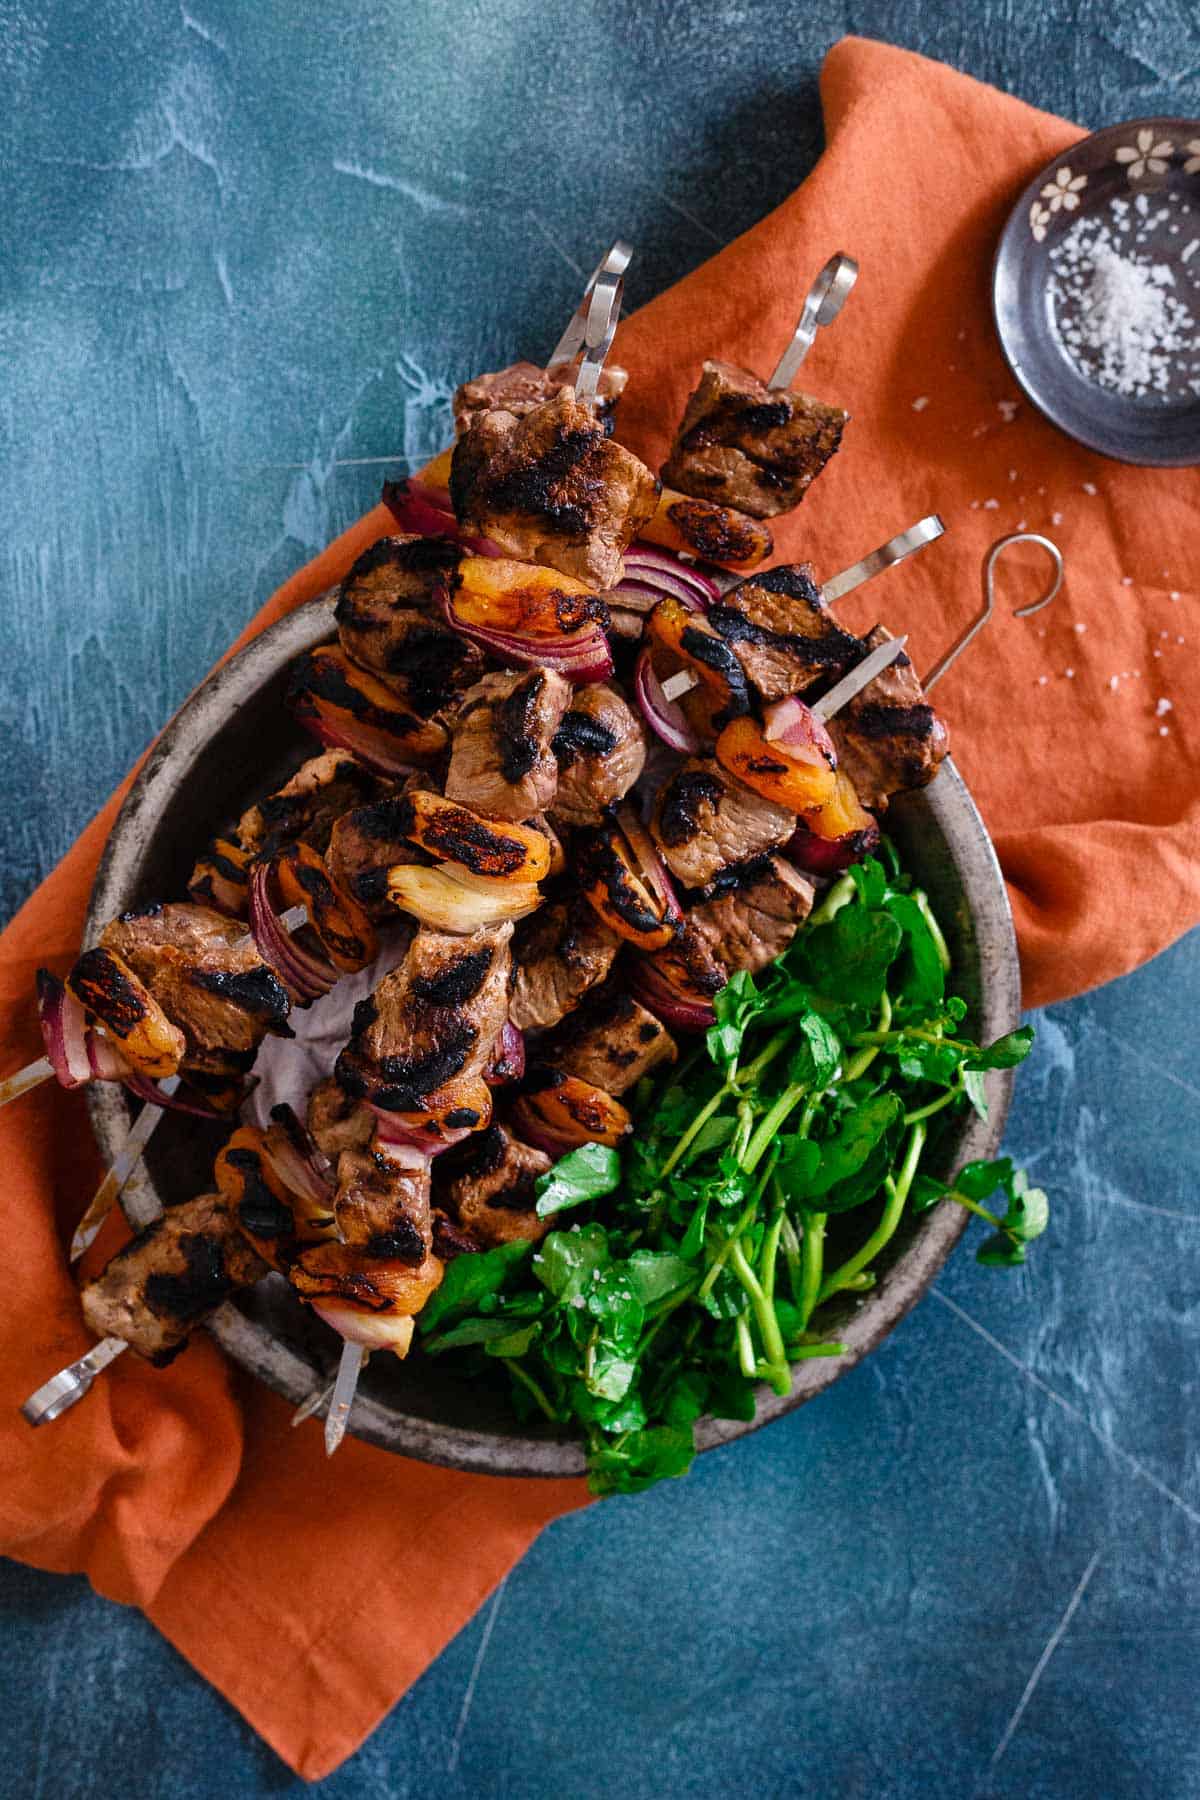 These lamb and apricot kebabs are perfect for spring grilling. A meal that tastes special but incredibly simple to make!